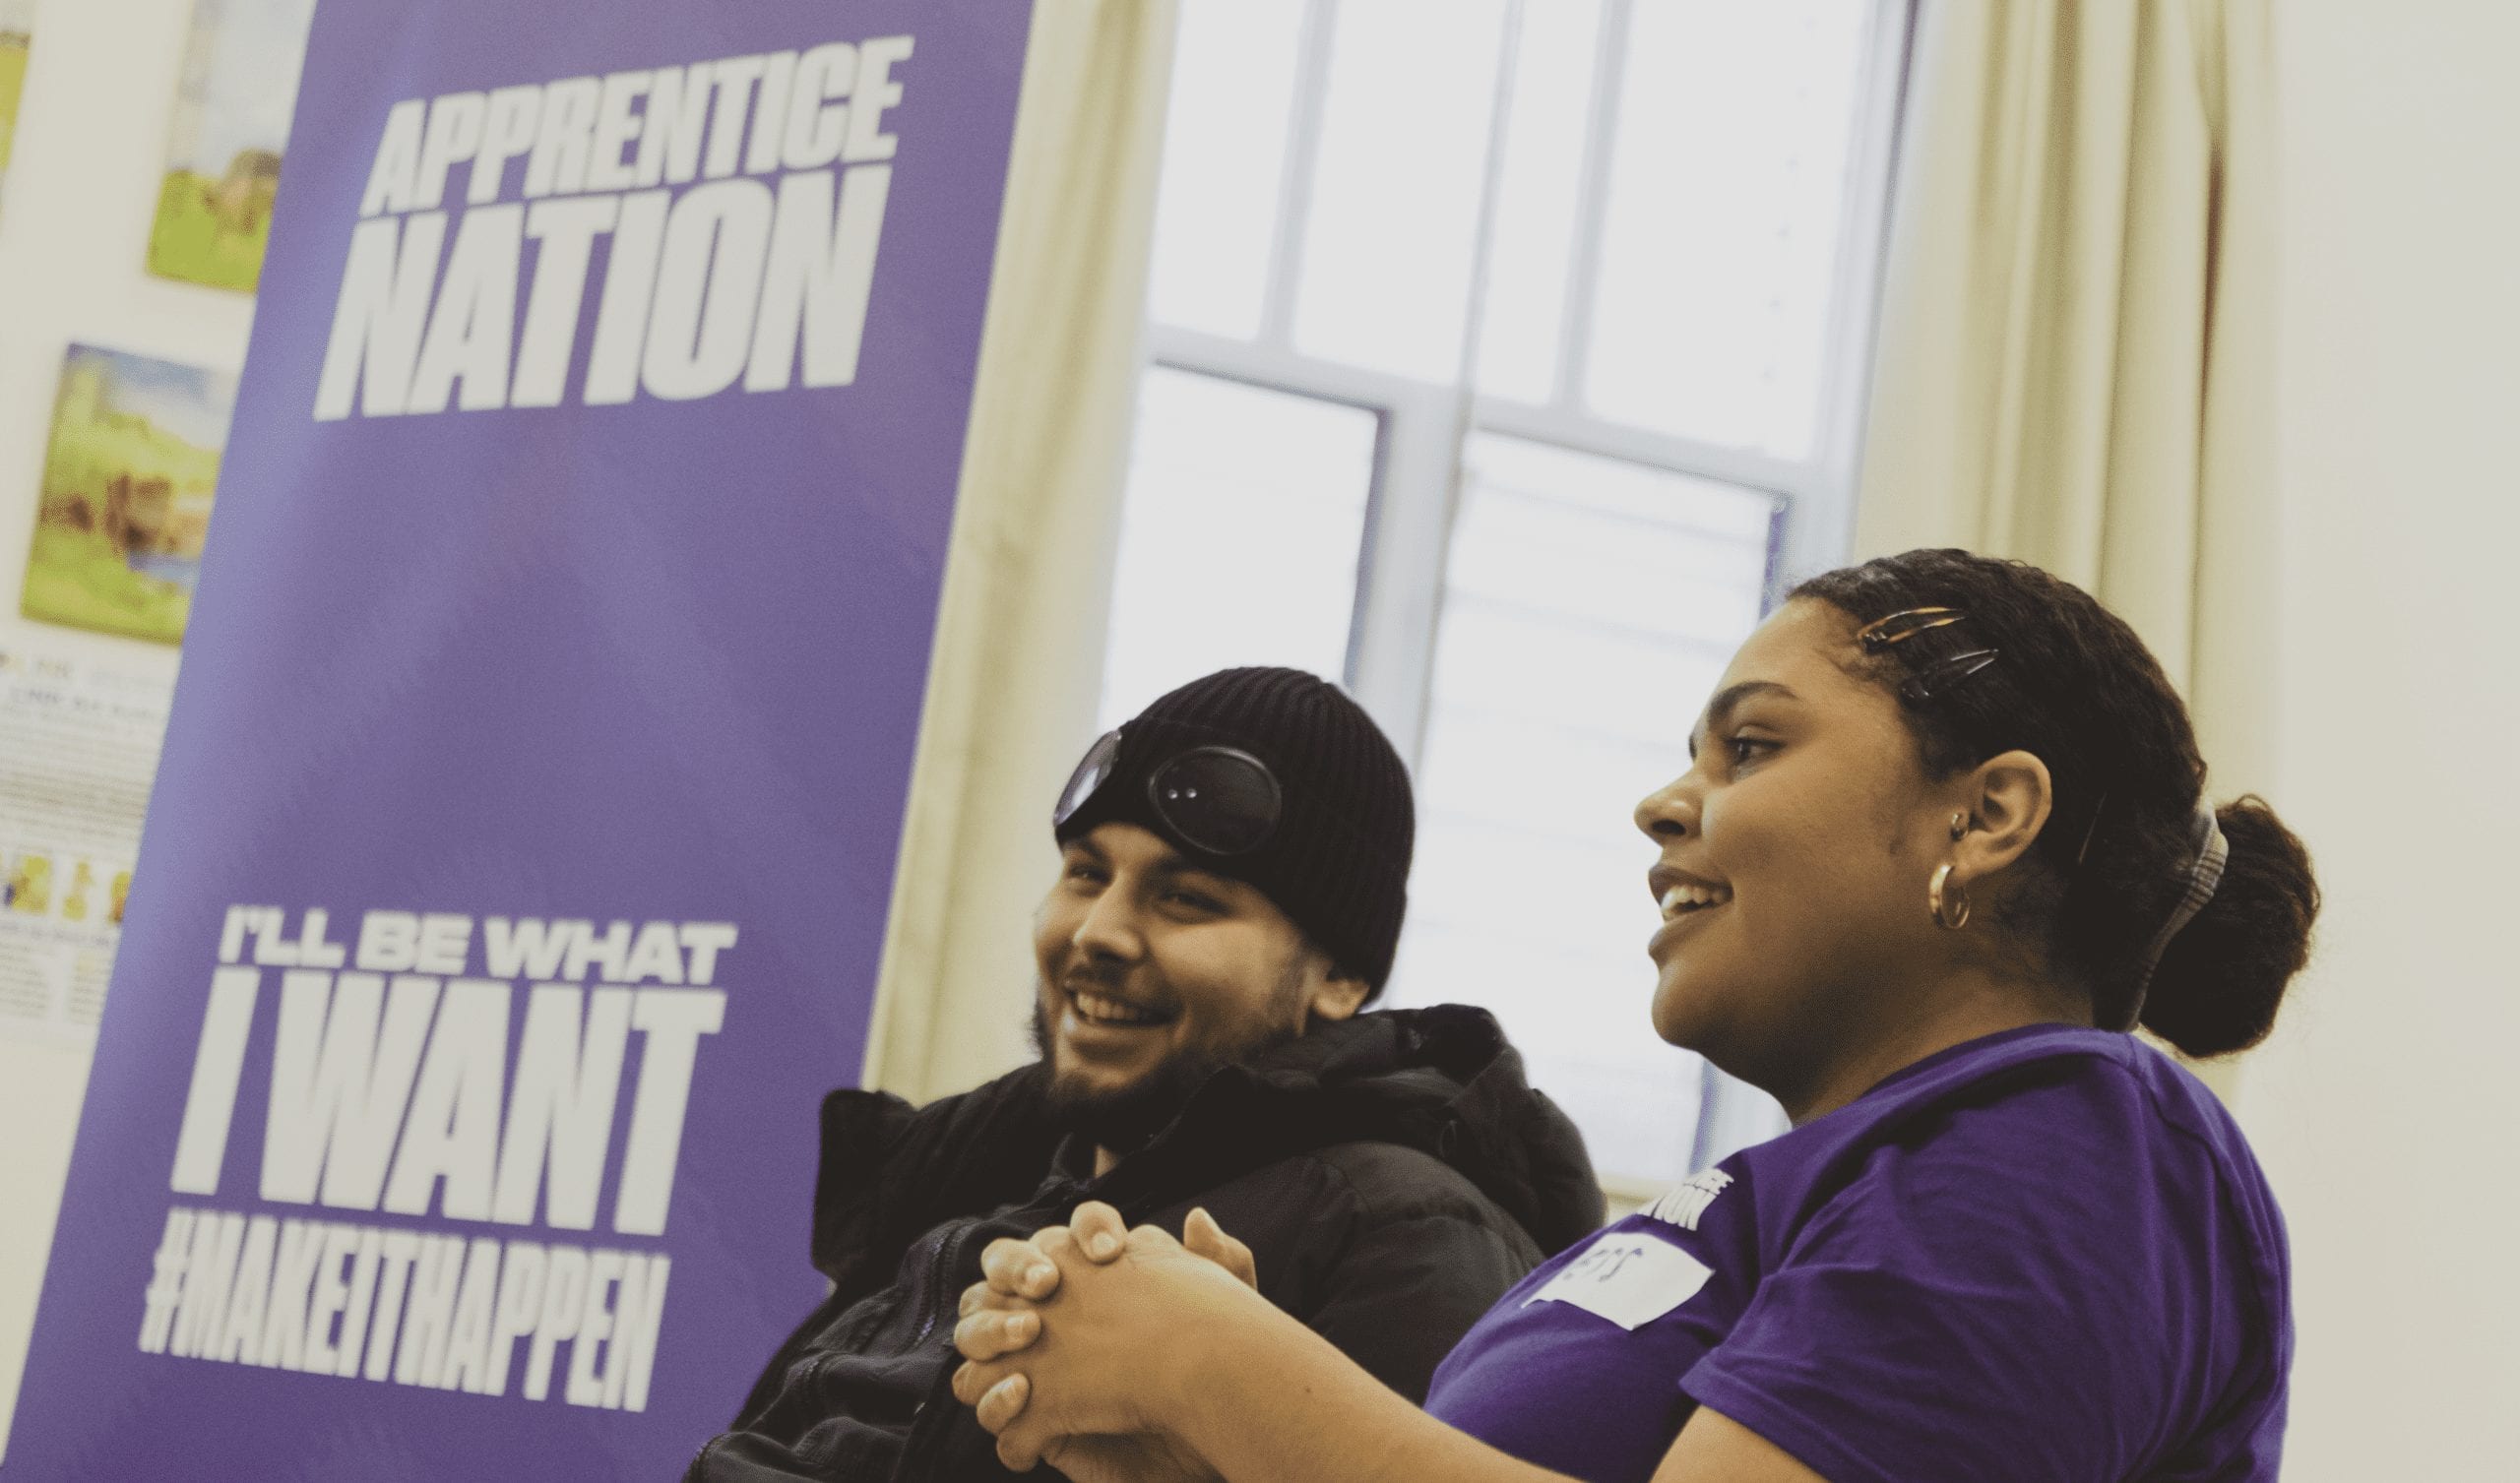 Jessica Oghenegweke interviewing Jaykae at Apprentice Nation in Manchester